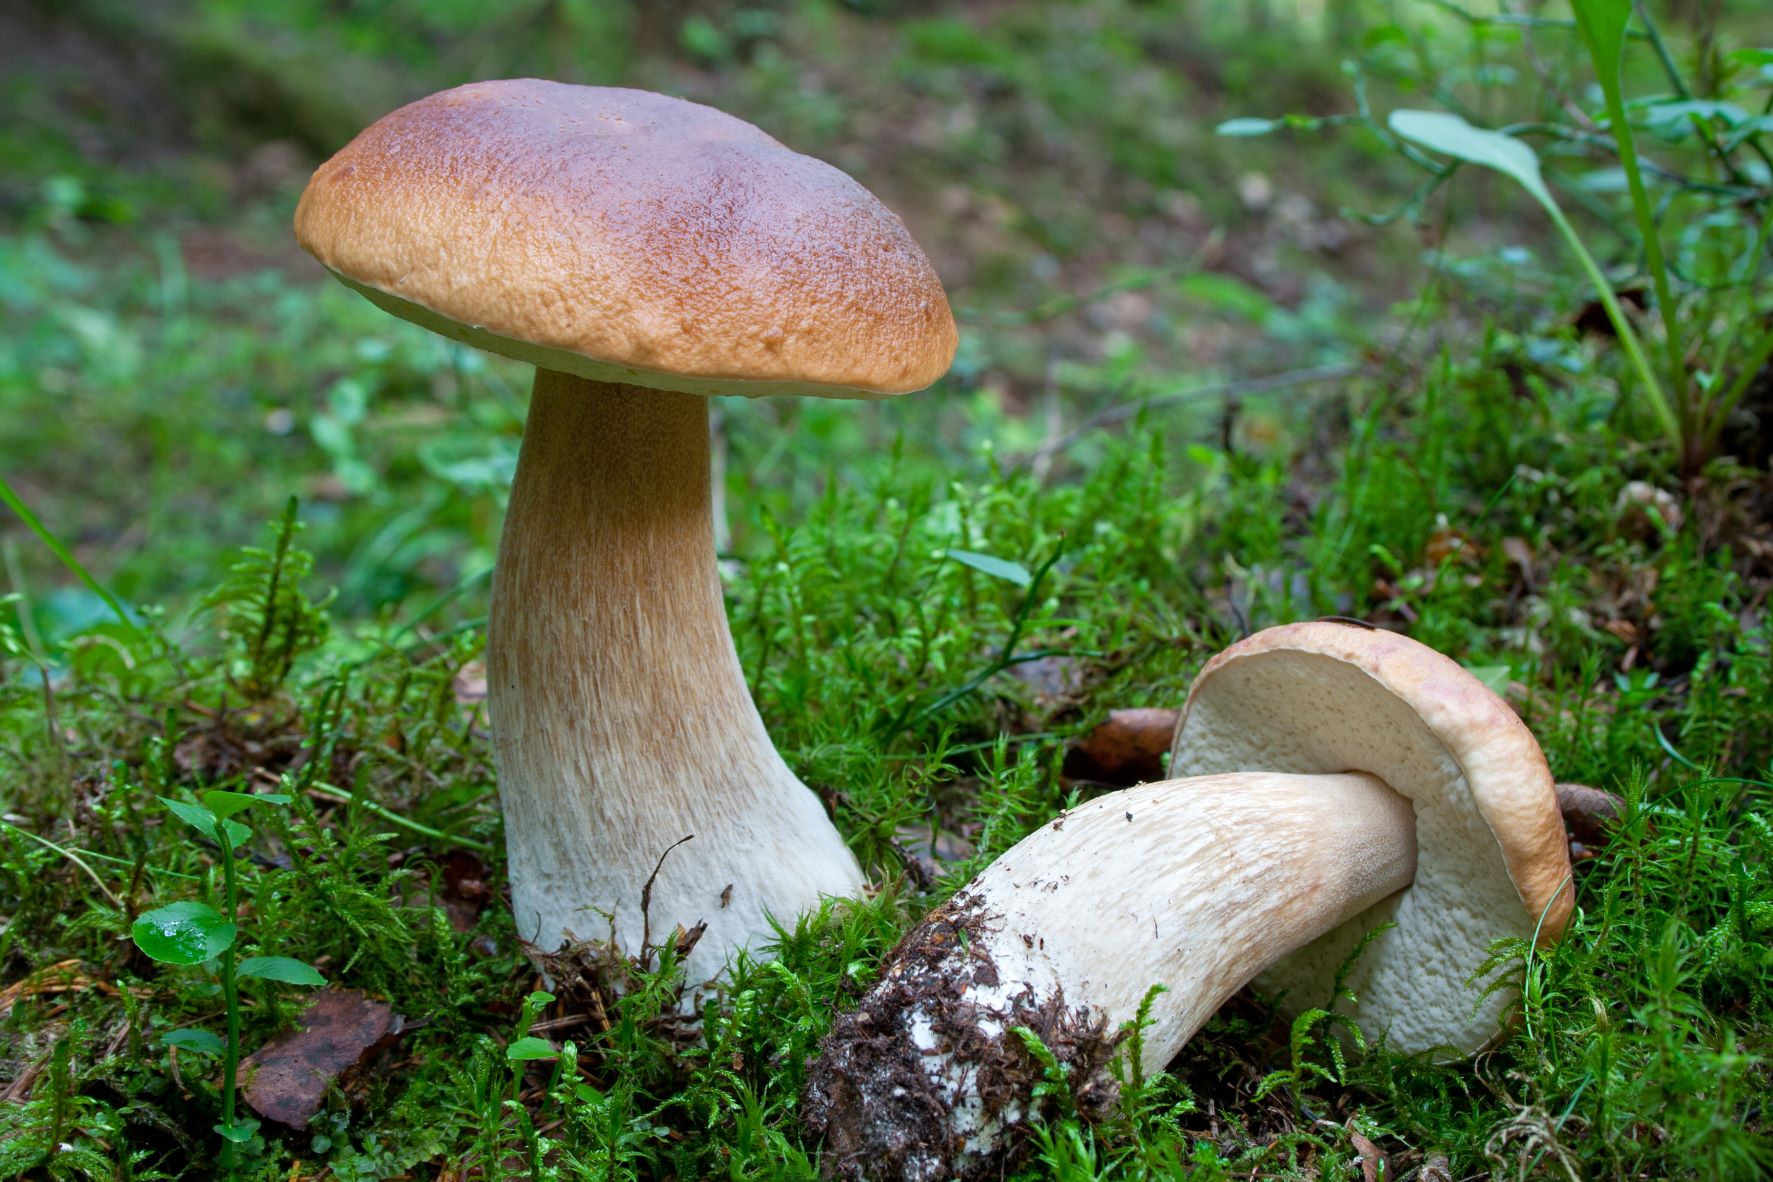 King bolete mushroom in the wild, with a brownish top on a white stem.